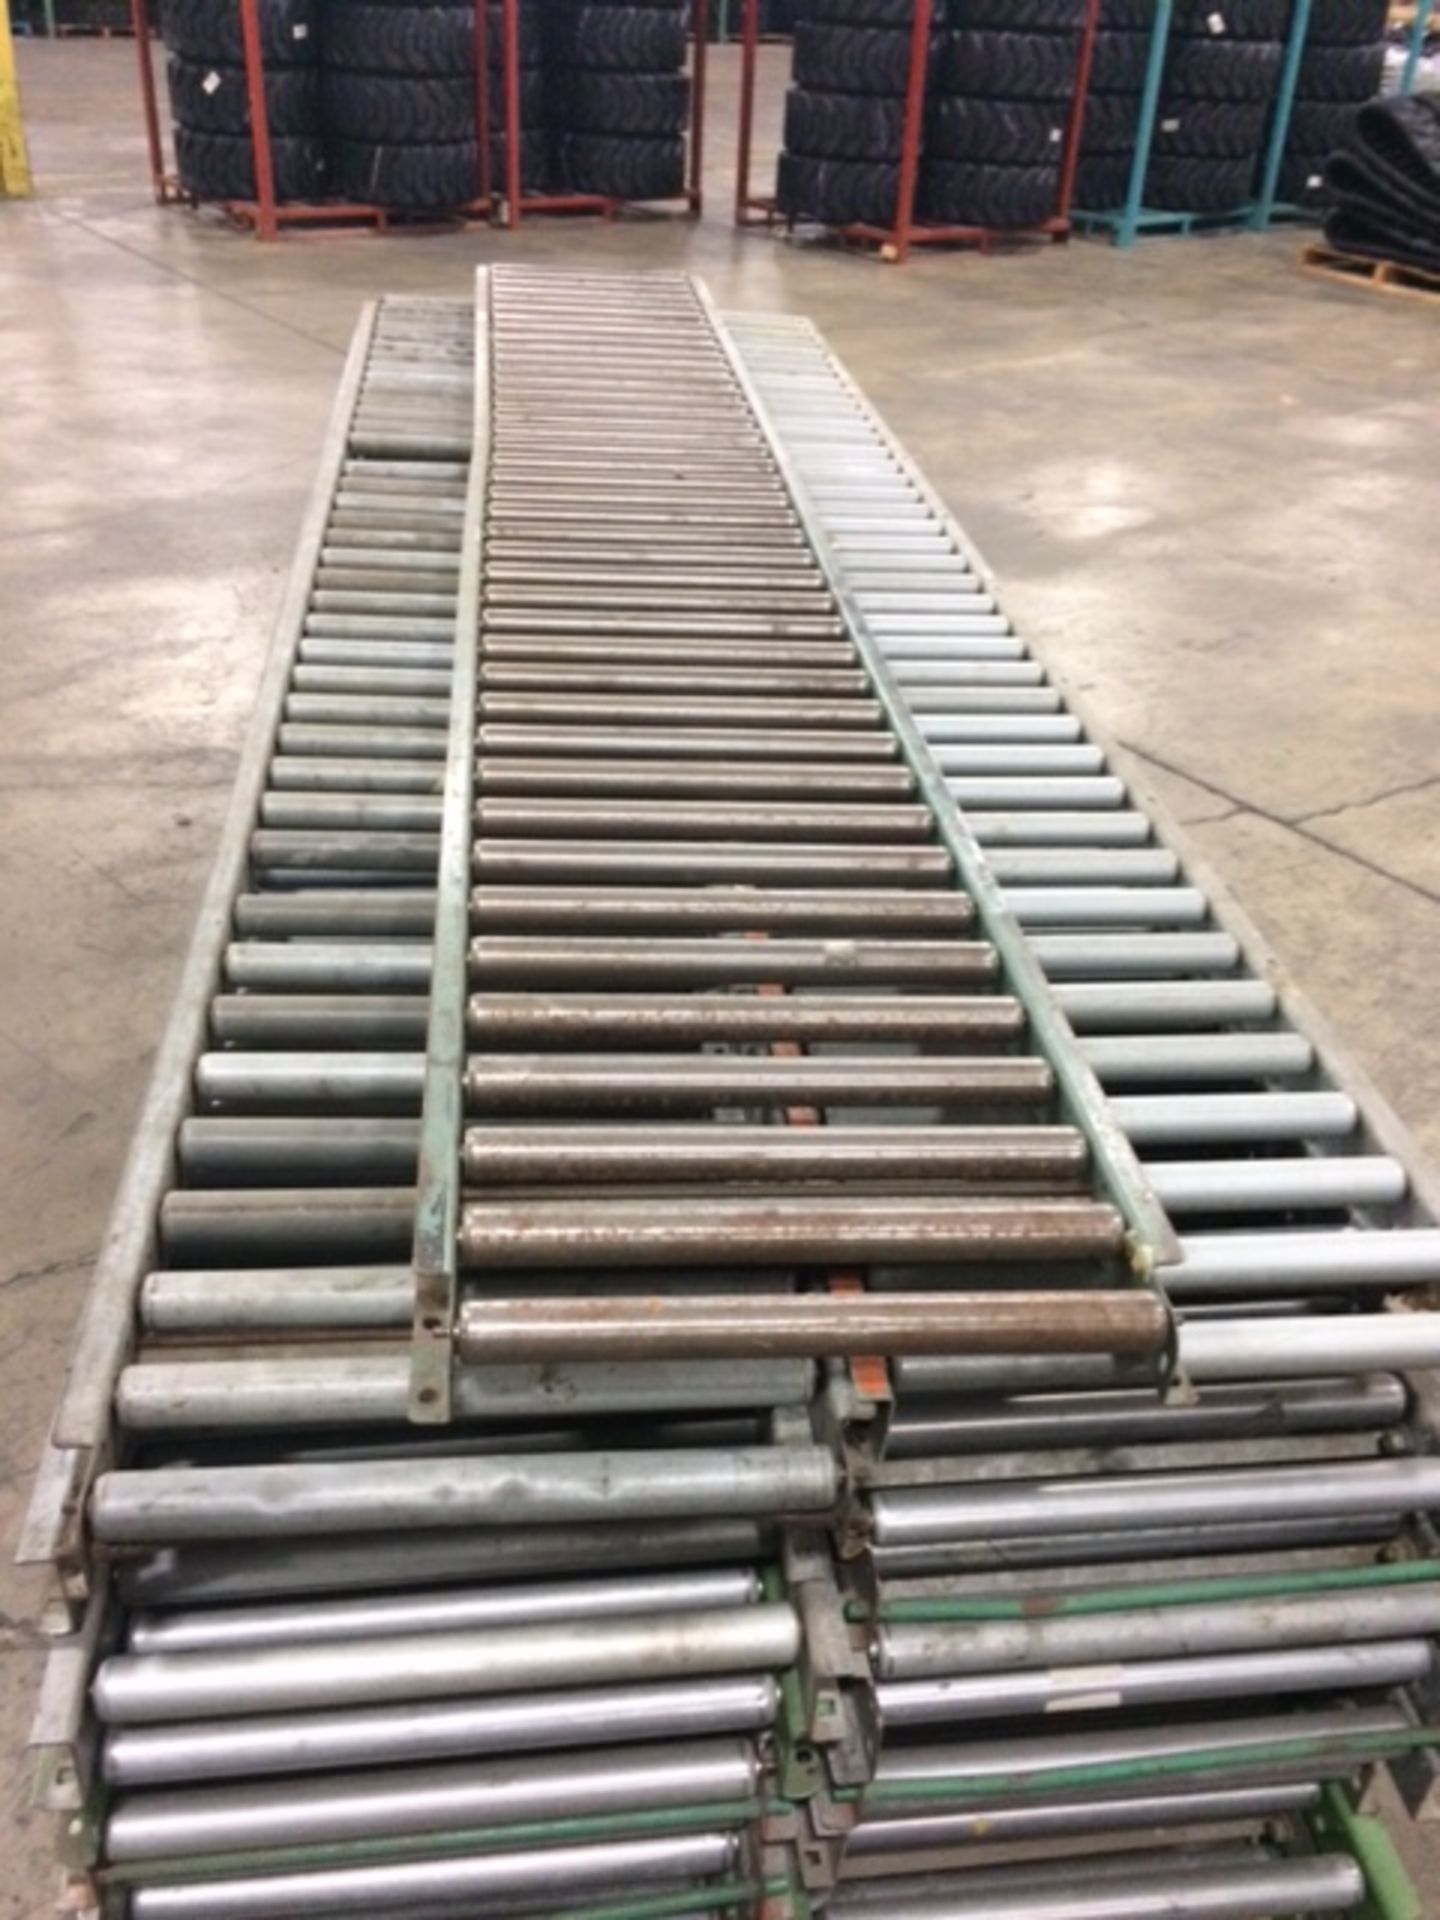 GRAVITY ROLLER CONVEYOR - 92 TOTAL LINEAR FEET - (8) 120" (1) 60" (1) 84" (X10) - Image 2 of 2